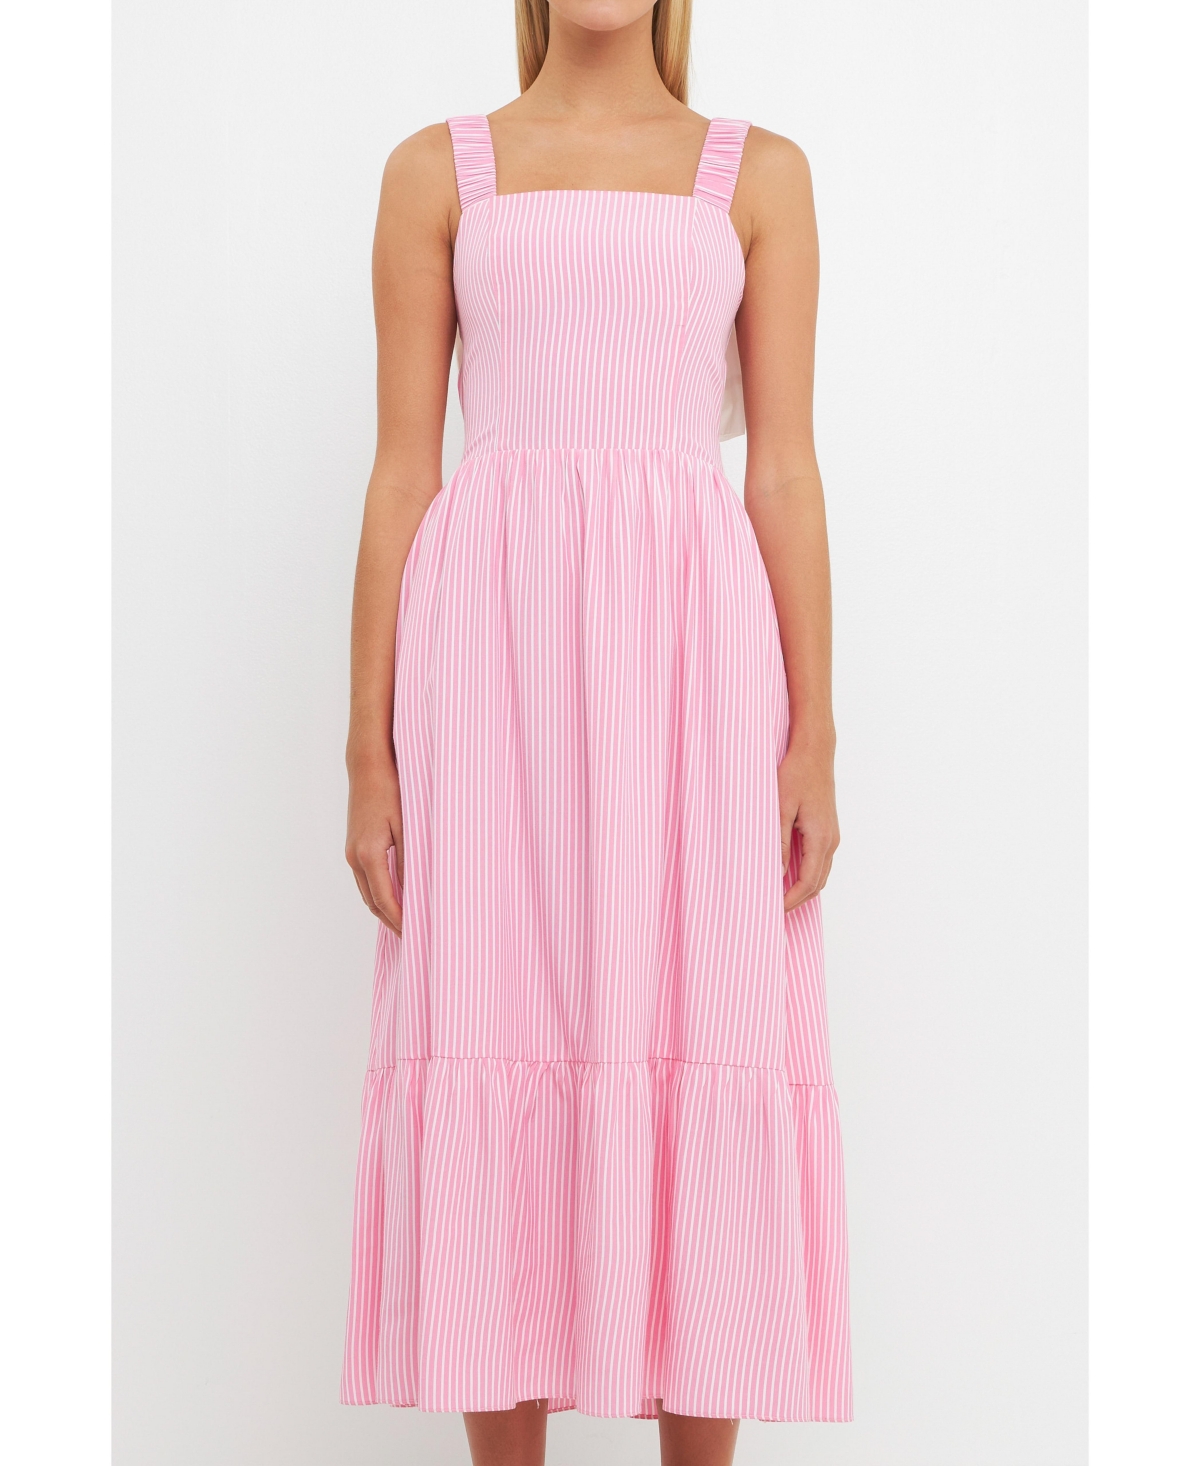 Women's Contrast Bow Striped Maxi Dress - Pink/ivory